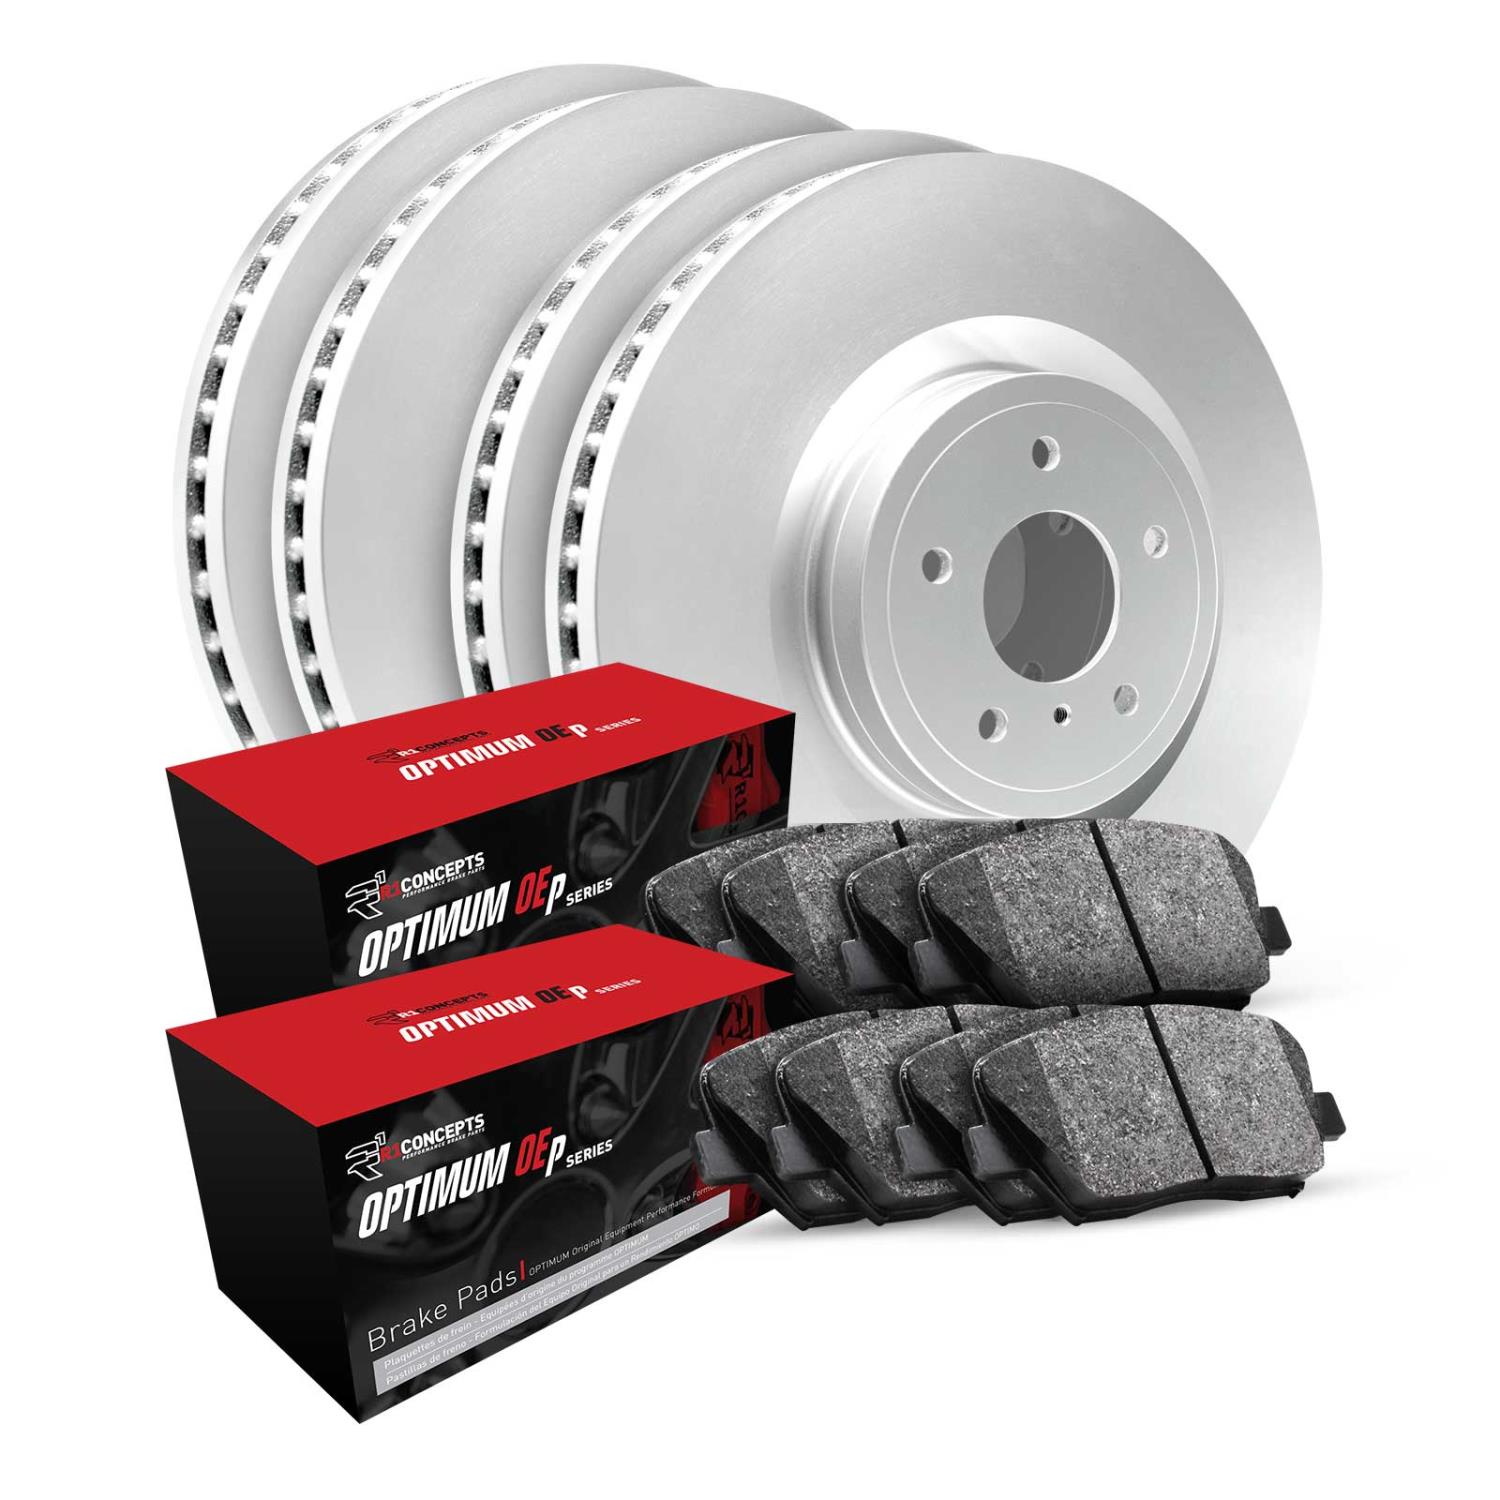 GEO-Carbon Brake Rotor & Drum Set w/Optimum OE Pads & Shoes, 2005-2010 Fits Multiple Makes/Models, Position: Front & Rear